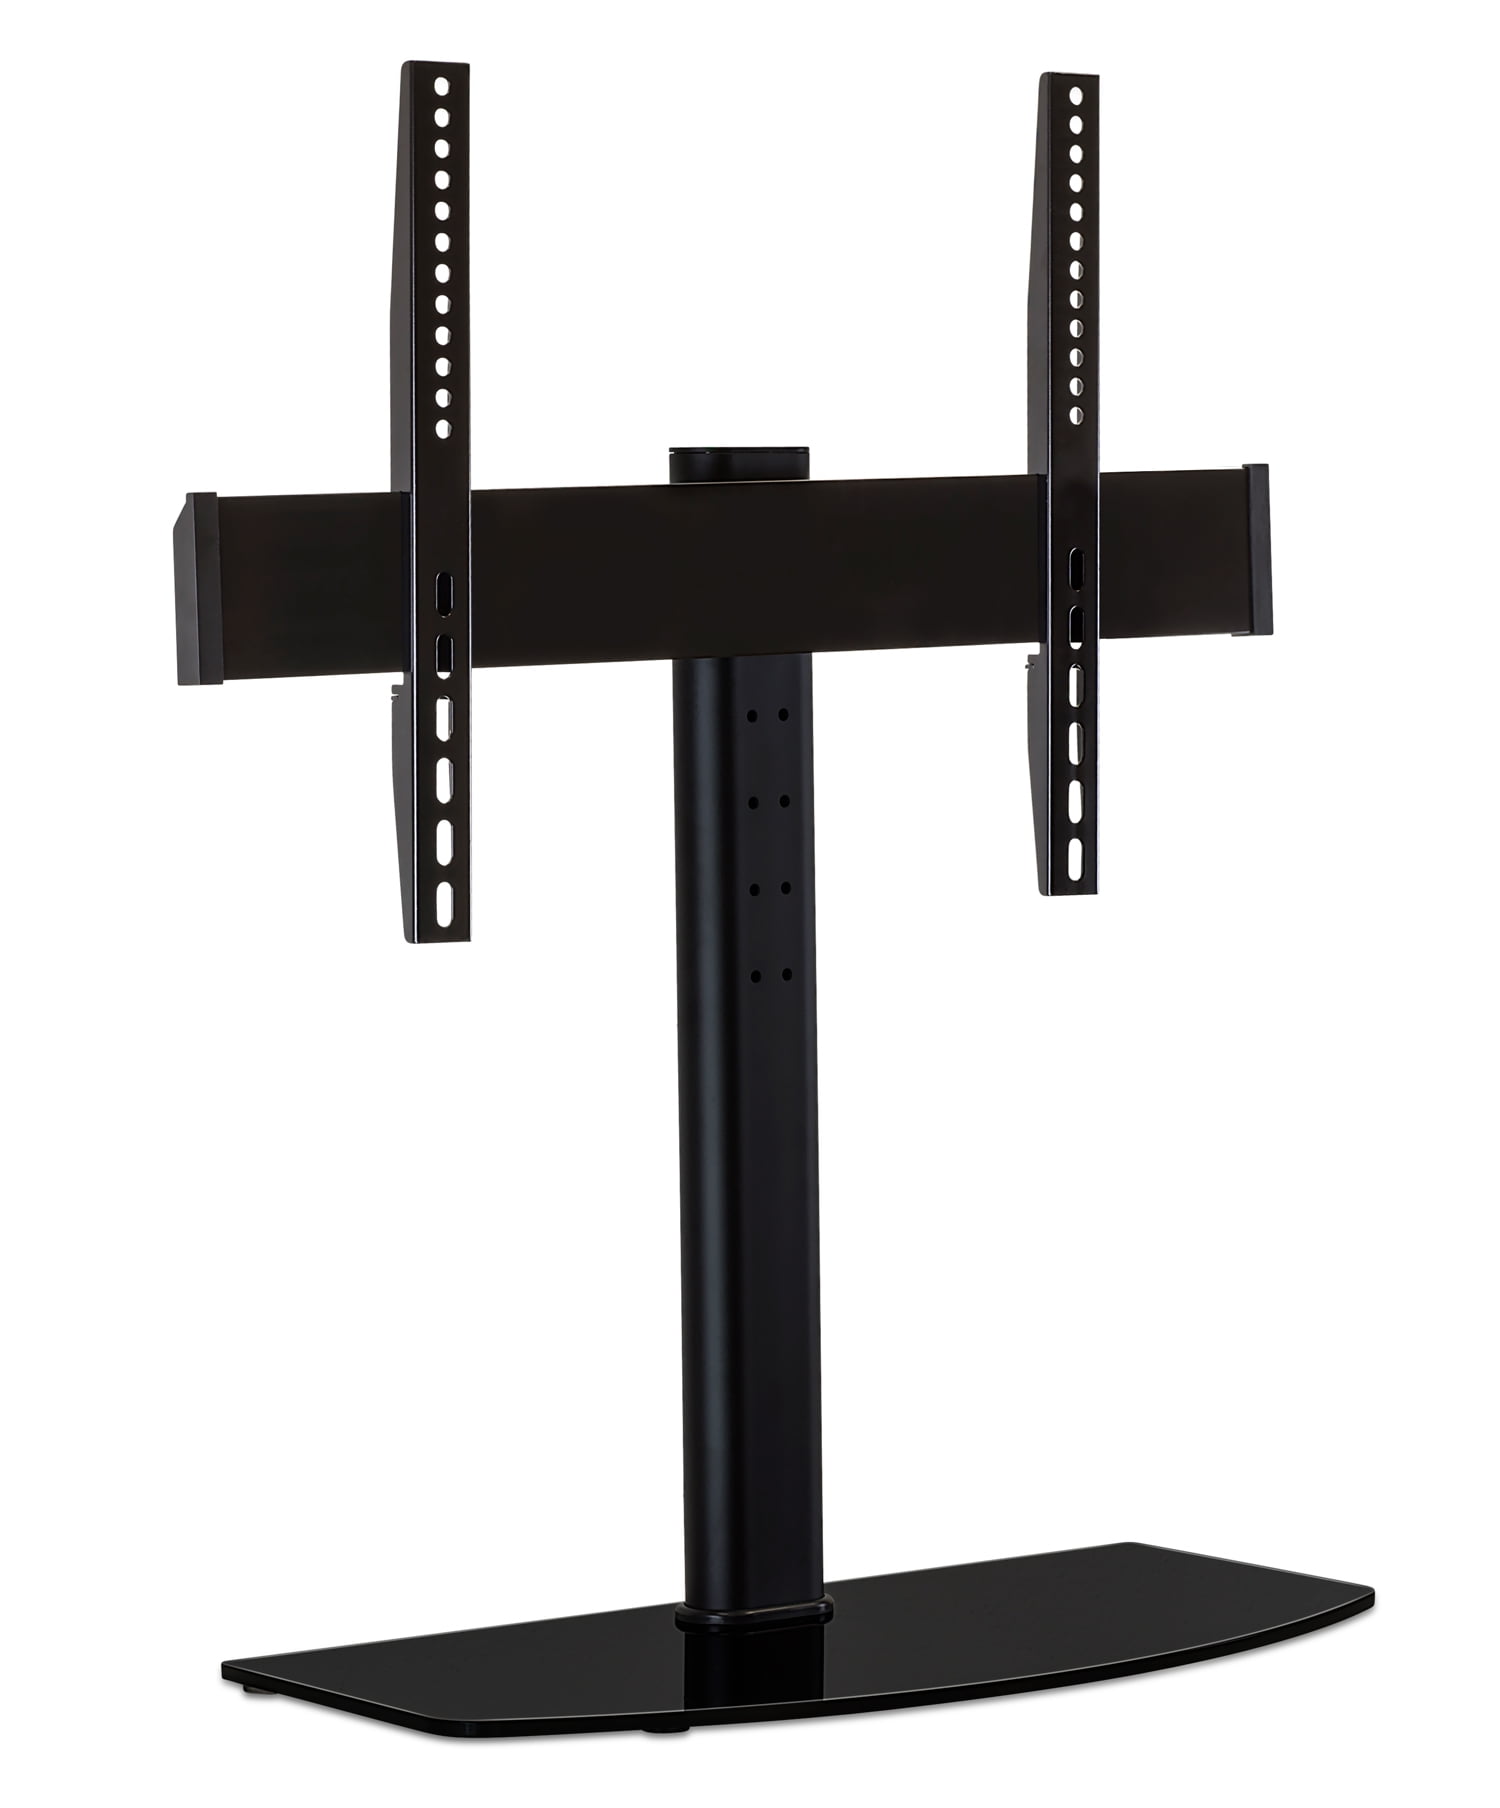 Mount-it! Universal Tv Stand Base Replacement, Table Top Pedestal Mount  Fits 32 - 60 Inch Lcd Led Plasma Tvs, 110 Lbs. Capacity